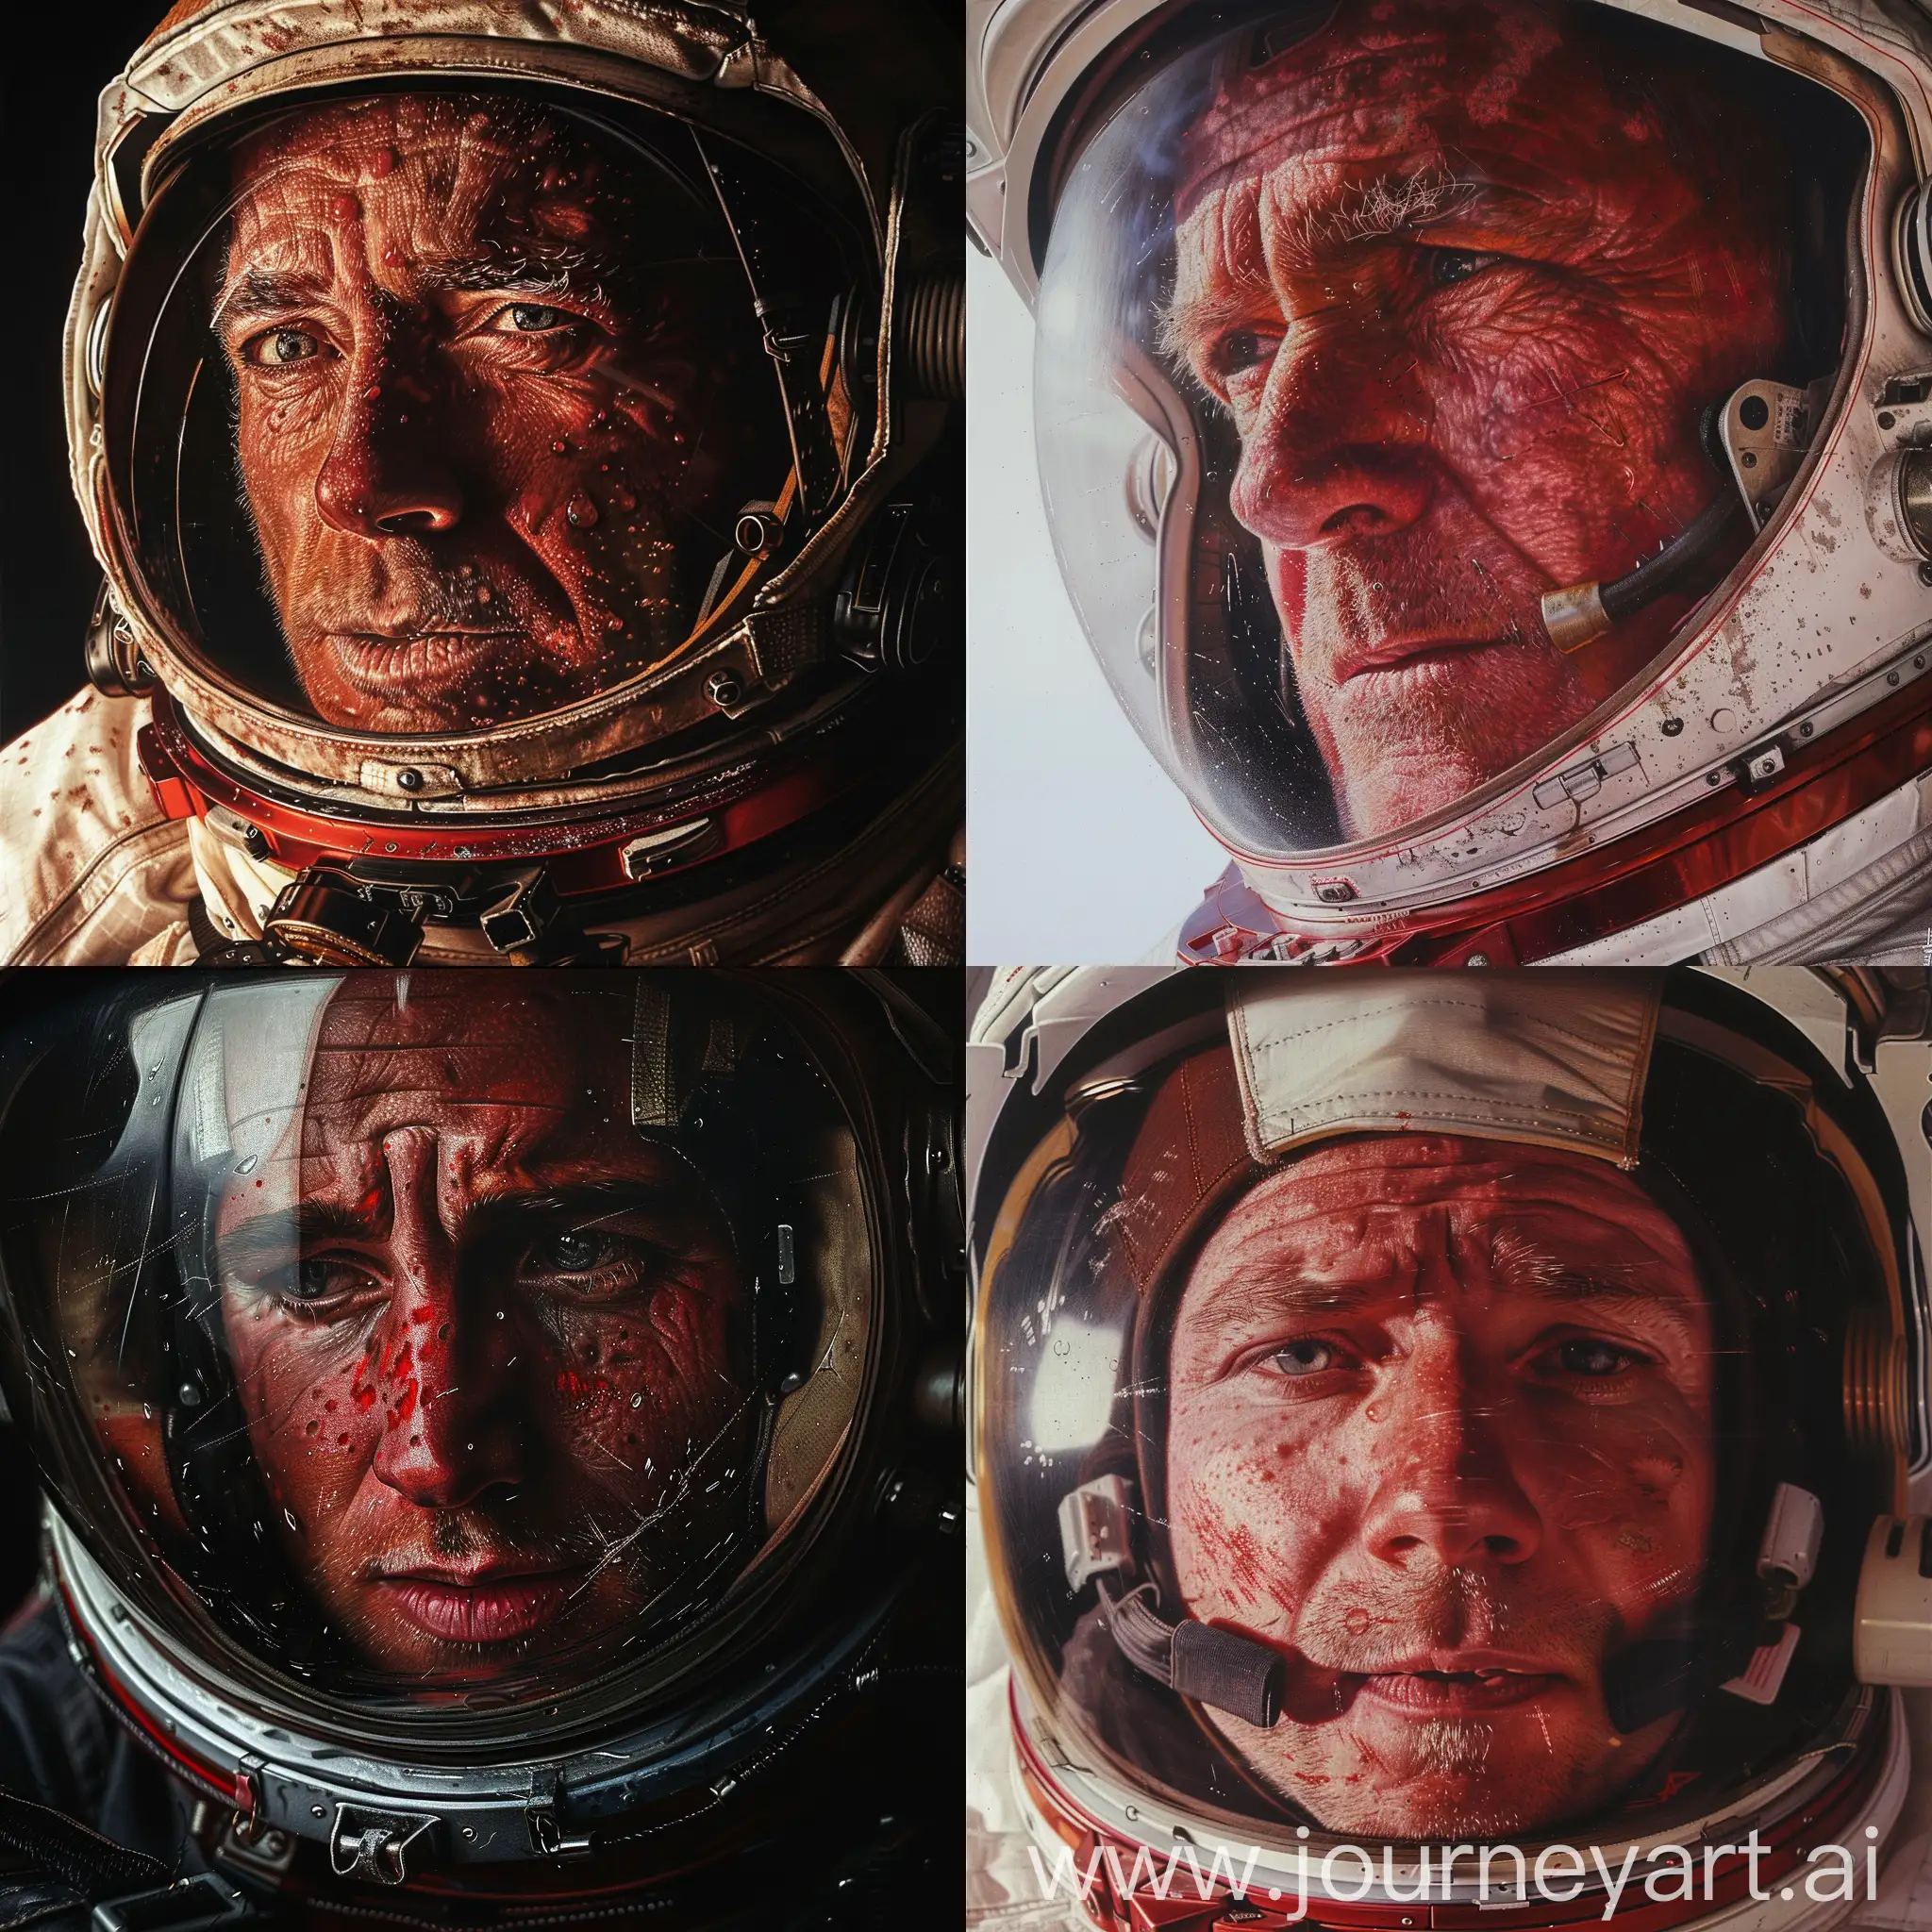 Photorealistic-Portrait-of-a-RedFaced-Astronaut-with-Wrinkles